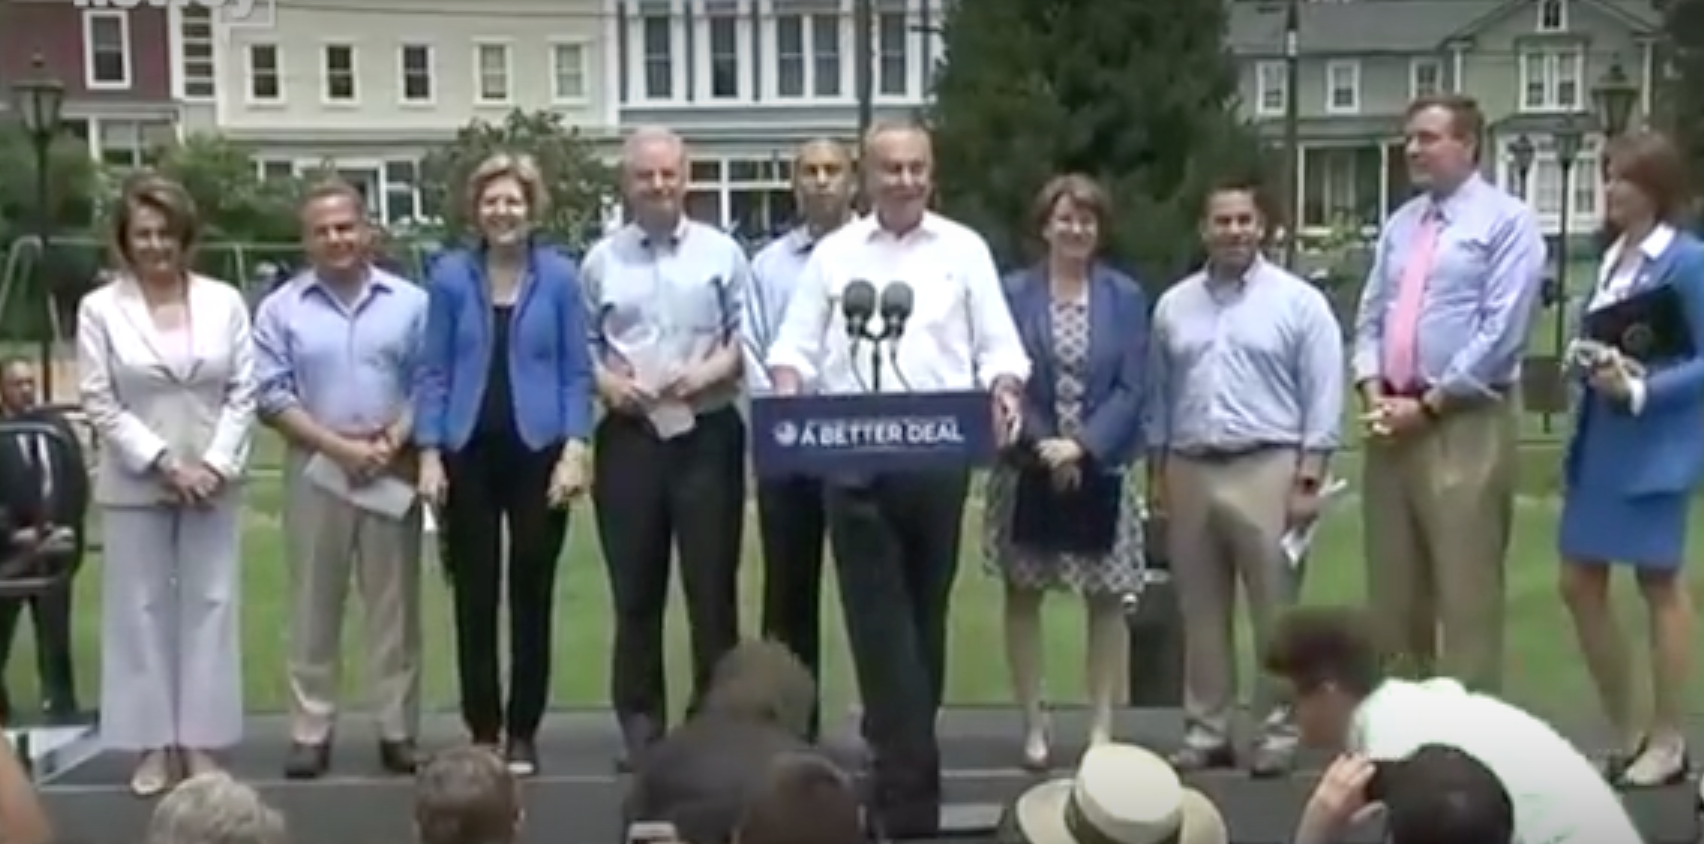 Sen. Chuck Schumer (D-NY), together with Democratic Senate and House leaders, announcing their "Better Deal" at Berryville, VA on July 24, 2017.